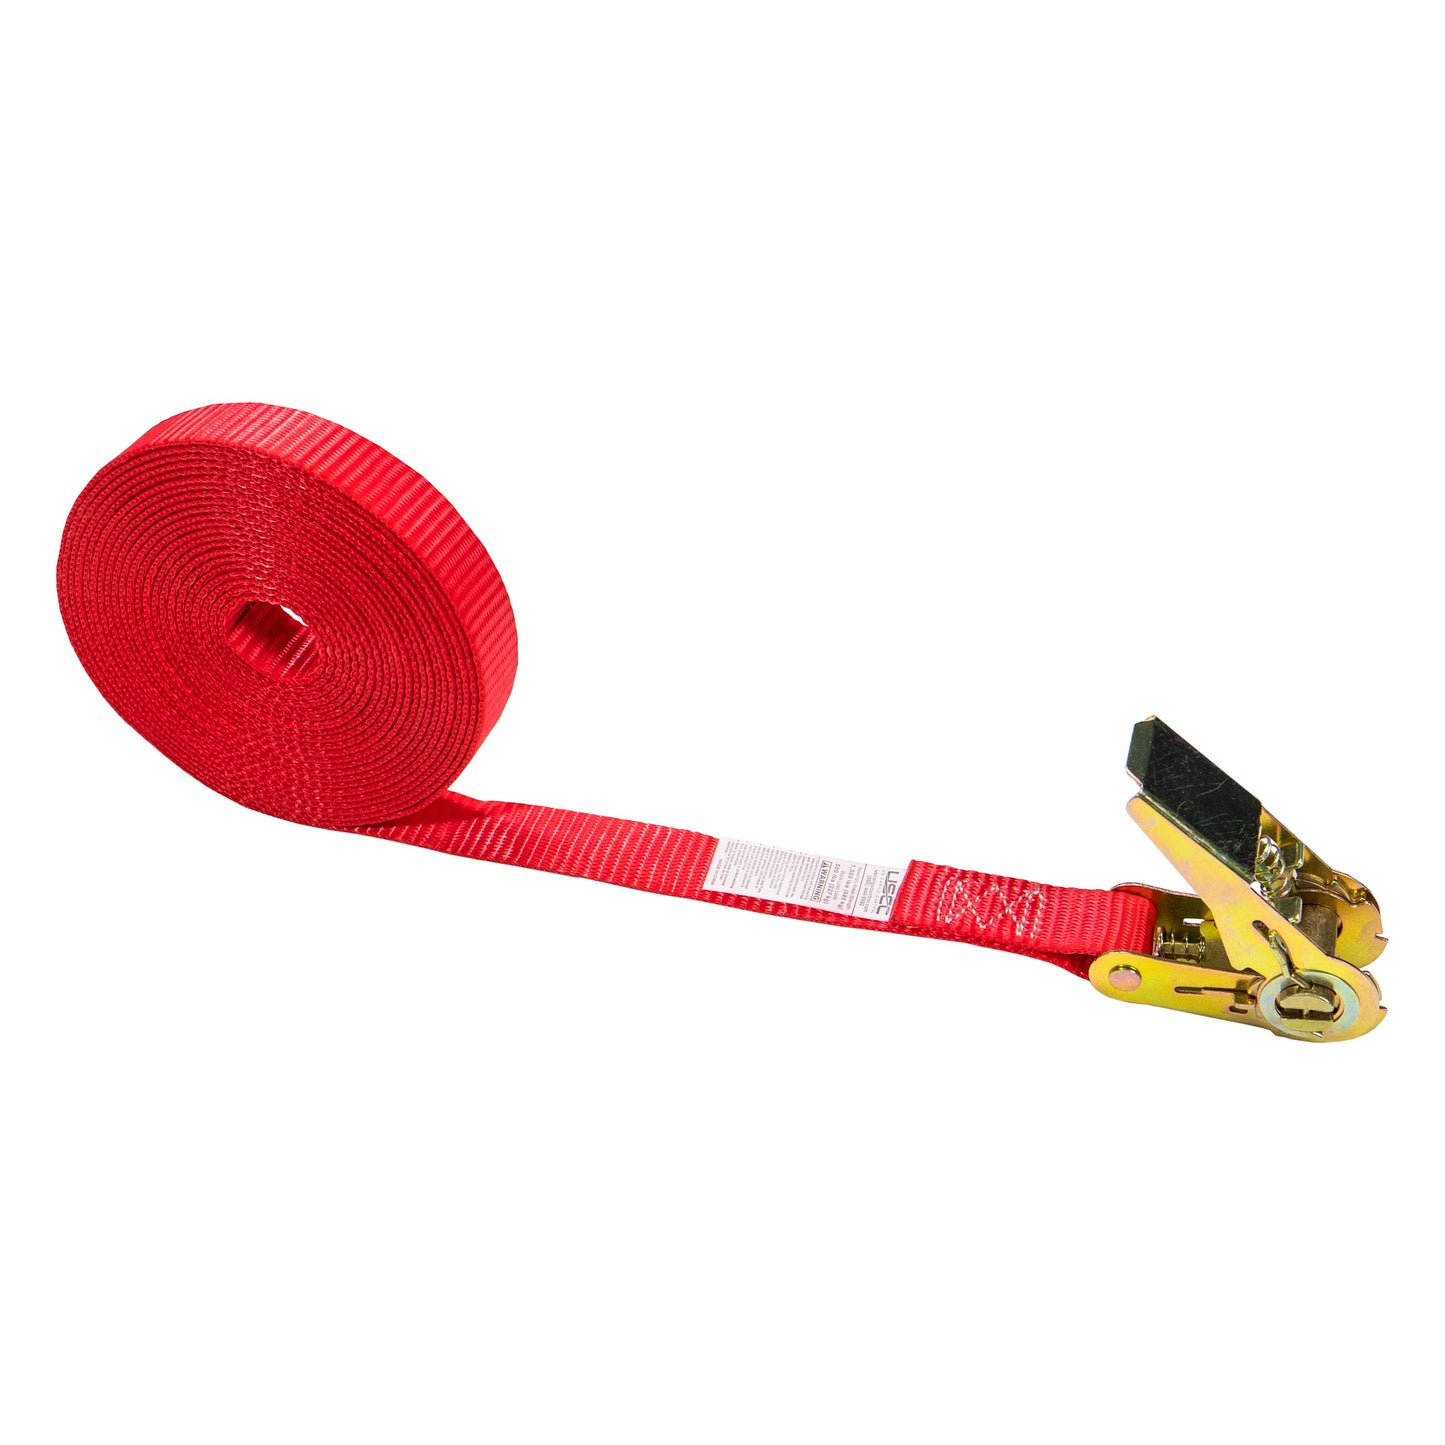 1 inch x 20 foot Red Endless Ratchet Strap image 1 of 9